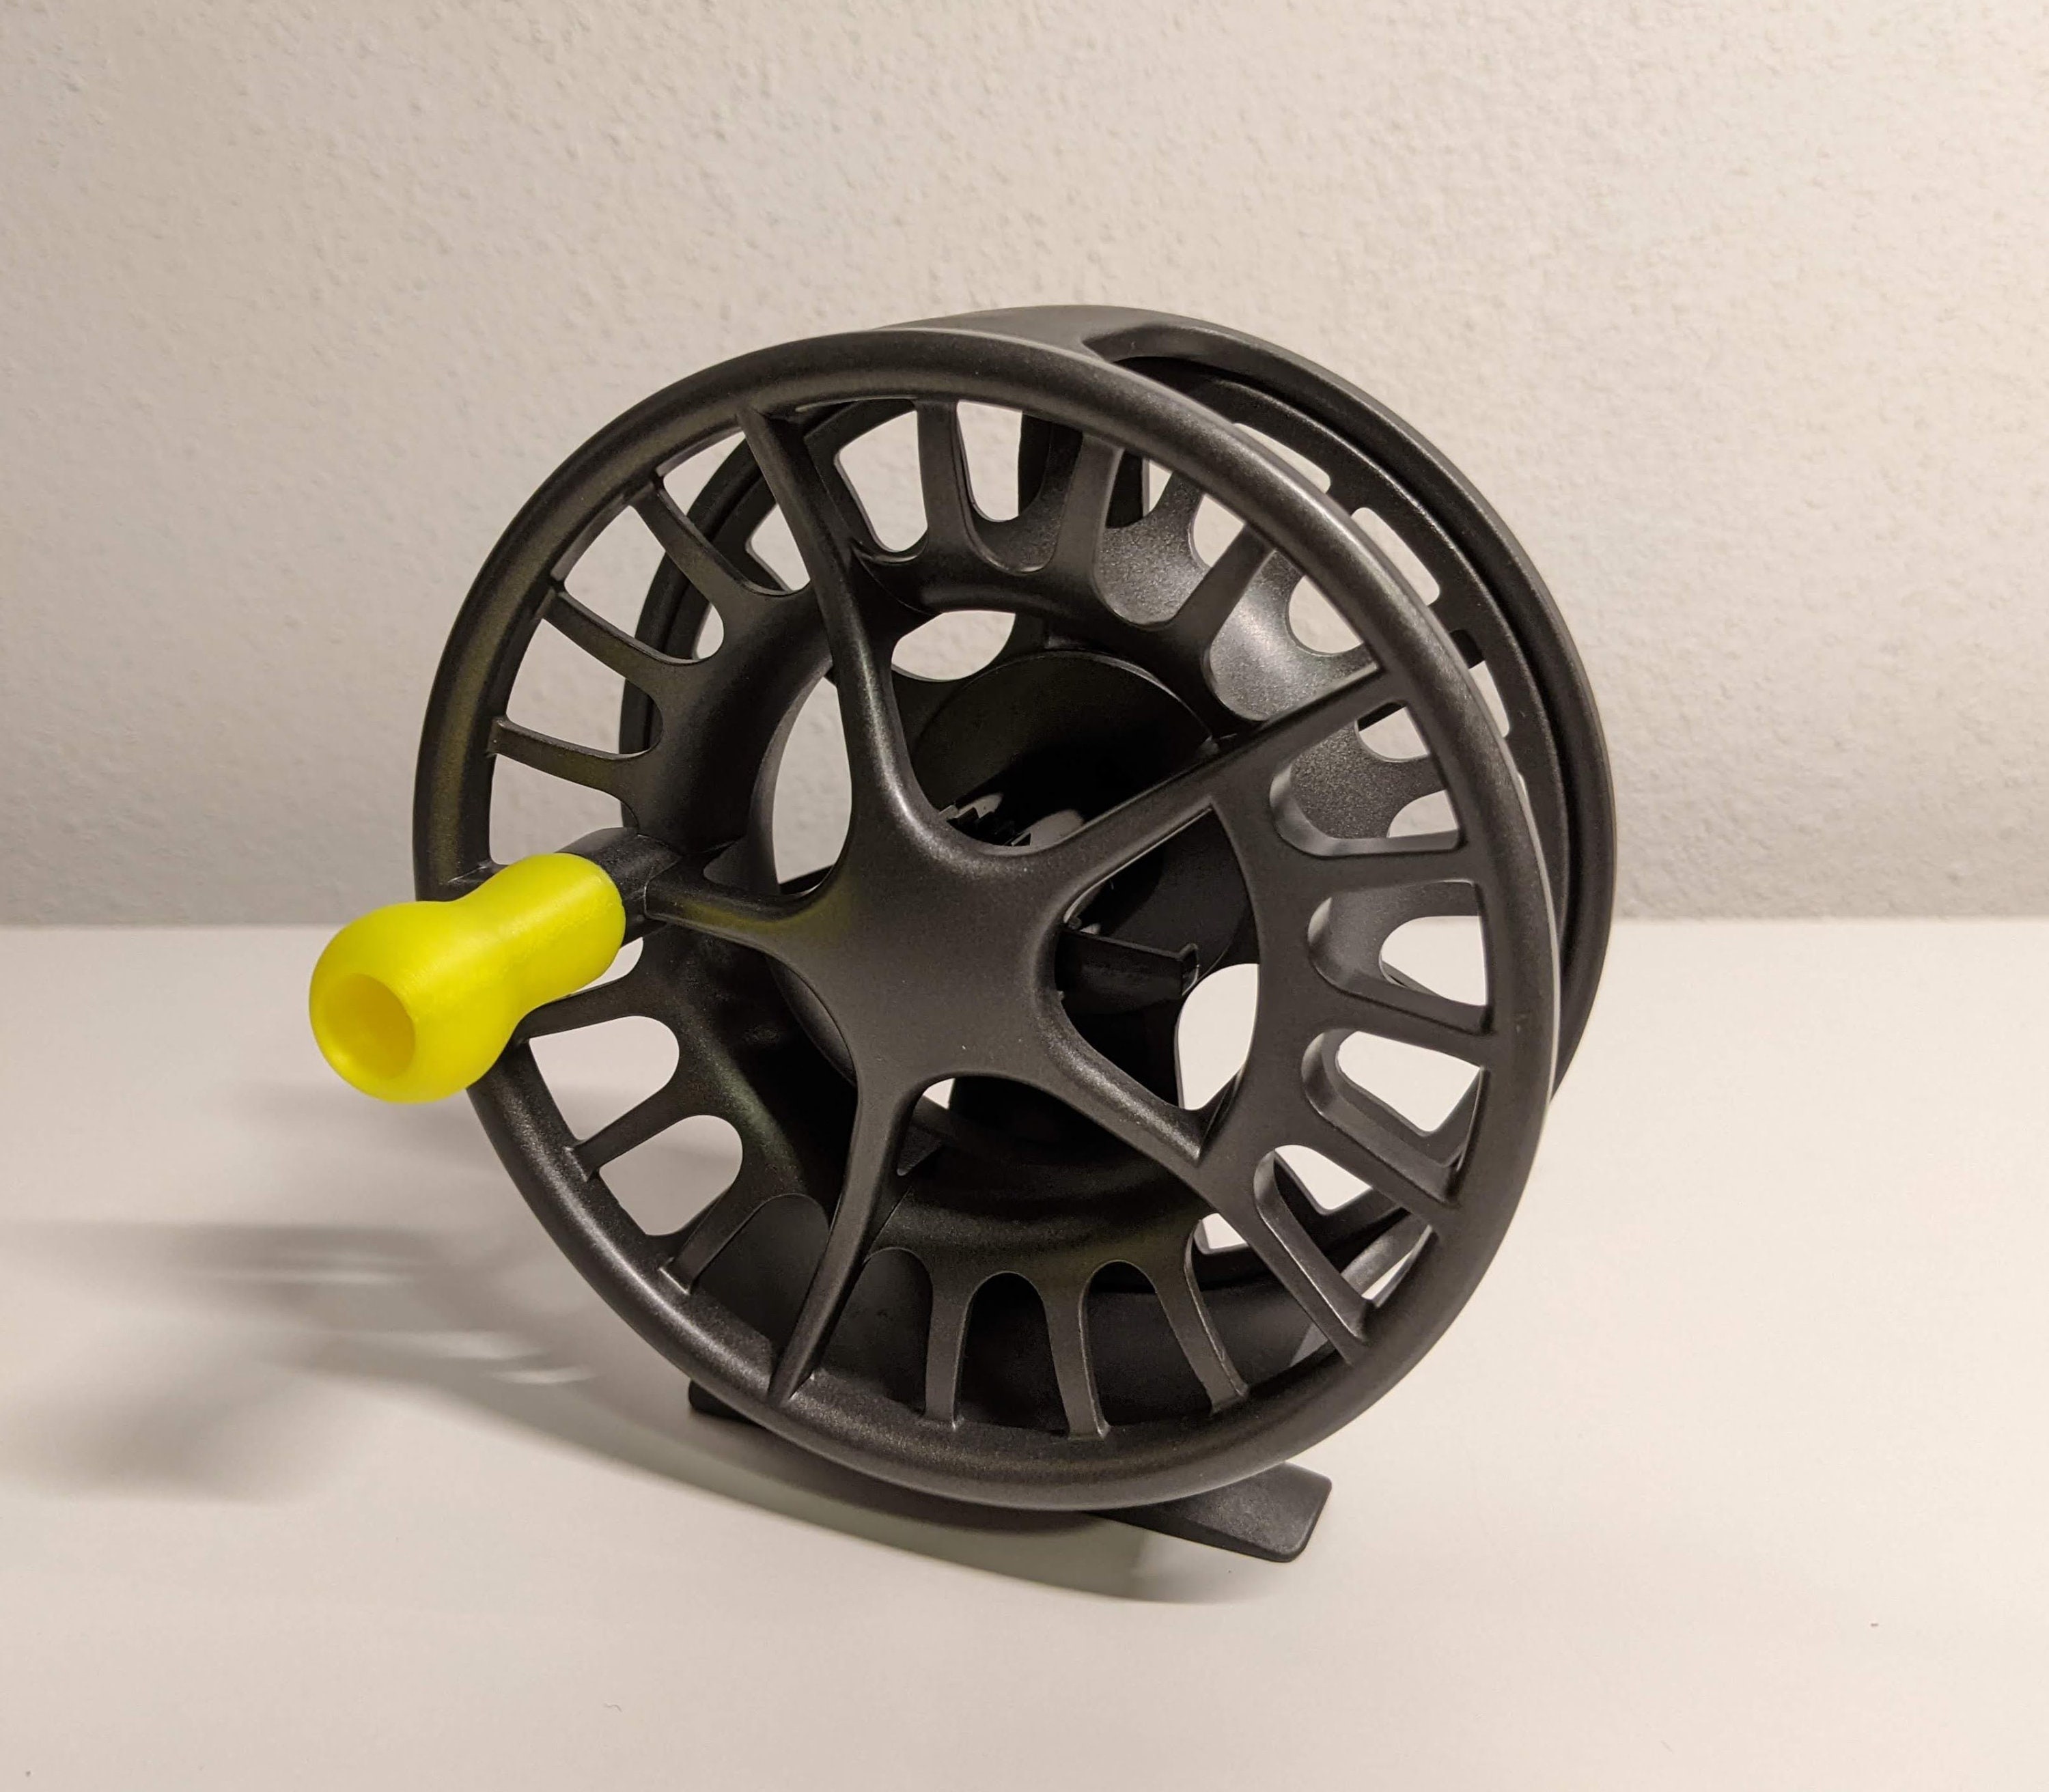  Galvan Torque 3 Fly Reel, Blue - with $30 Gift Card : Sports &  Outdoors